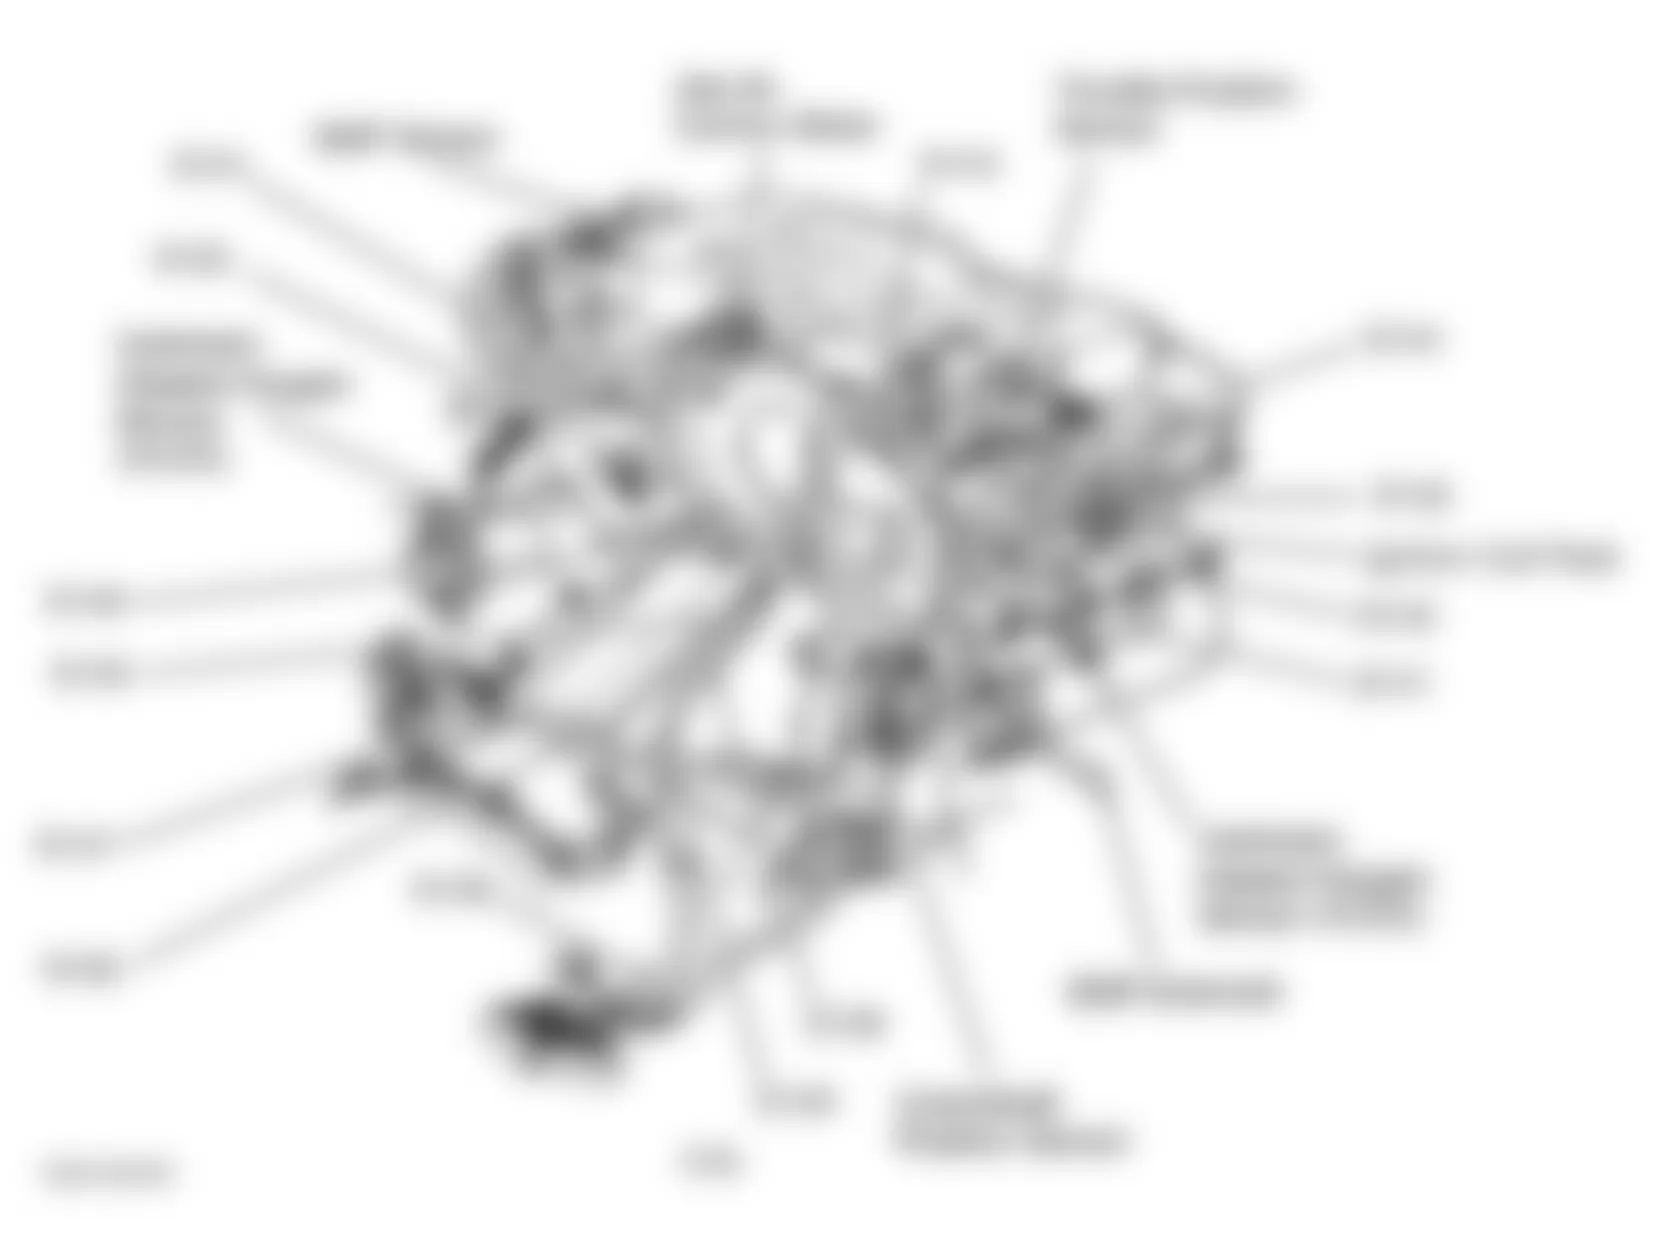 Dodge Intrepid ES 1997 - Component Locations -  Top Right Side Of Engine (3.5L)